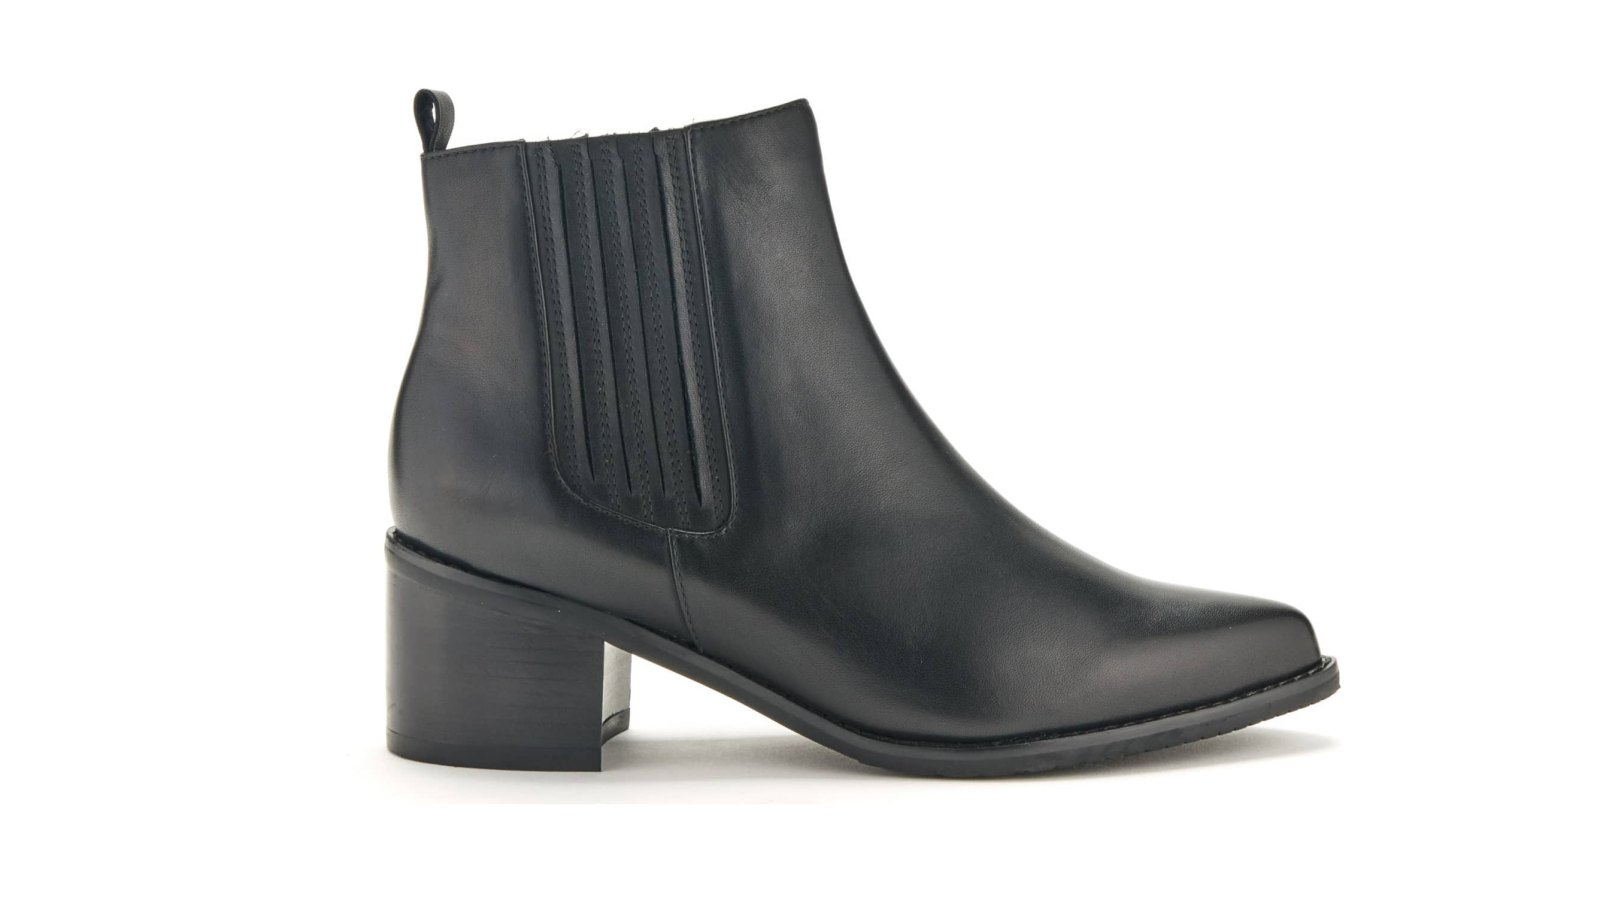 Step Out Rain or Shine in These Stylish Waterproof Booties